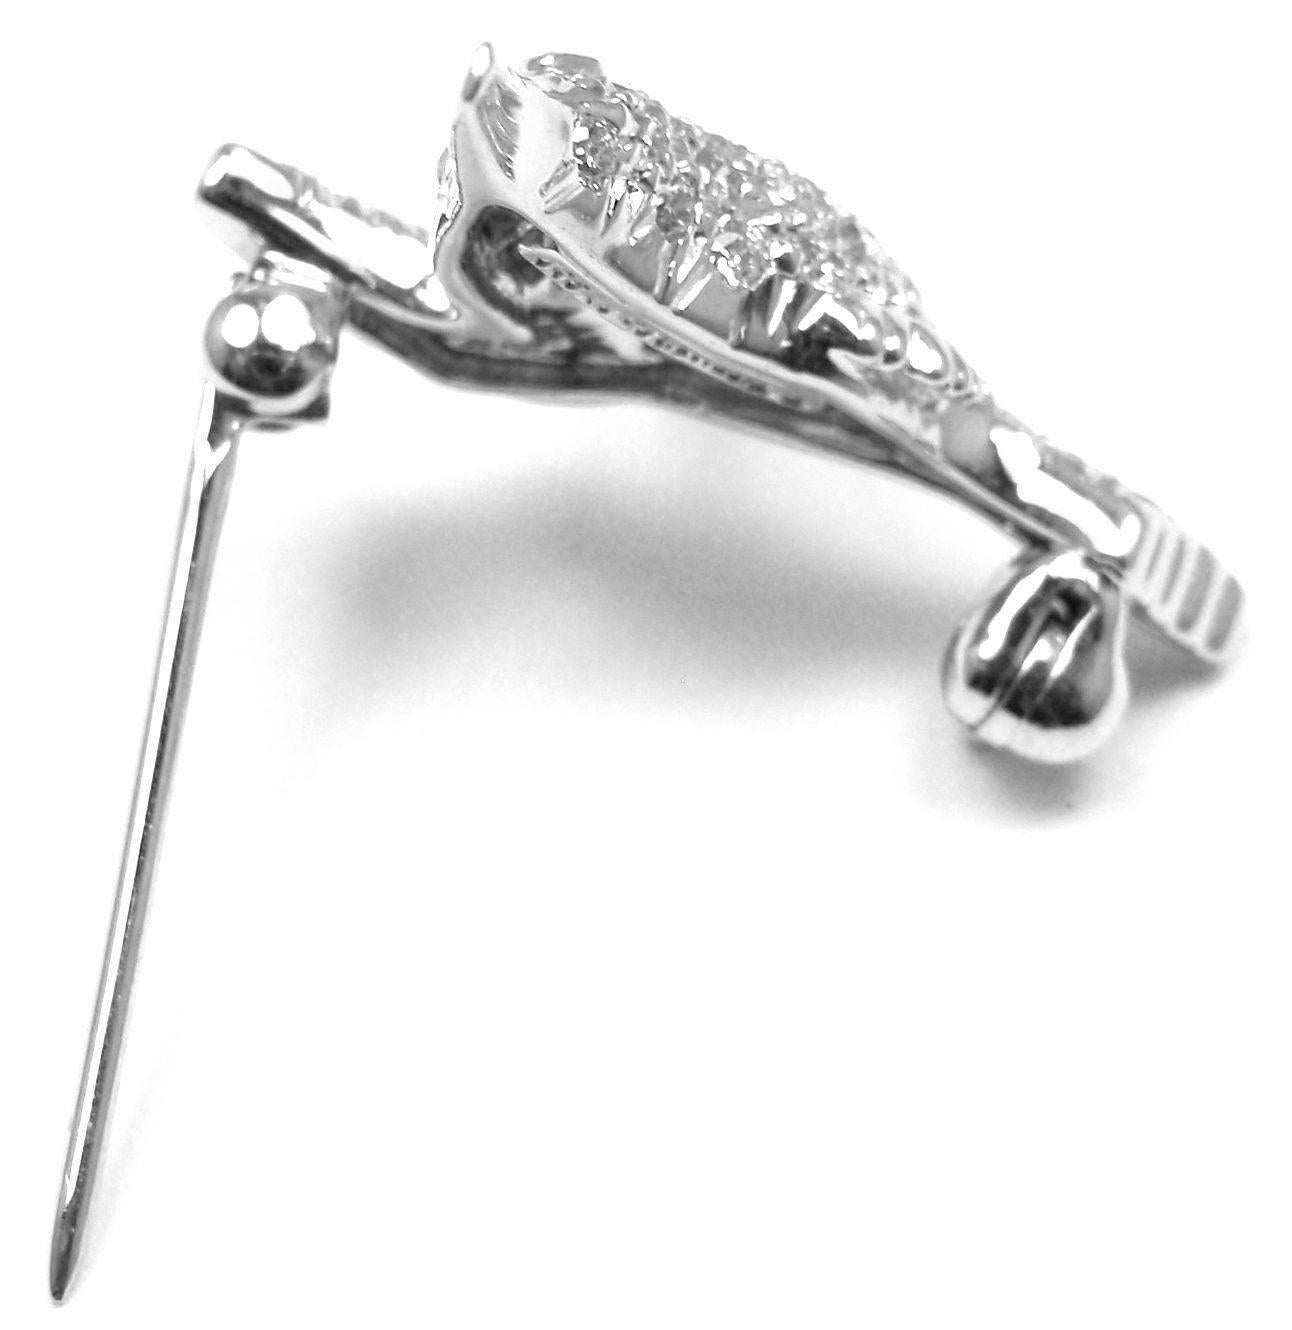 Platinum Diamond Crown Brooch Pin by Tiffany & Co. 
With round brilliant cut diamonds VS1 clarity, G color total weight approx. .75ct

Details:
Measurements: 21mm x 19mm
Weight: 3.9 grams 
Stamped Hallmarks: Tiffany & Co PT950 

*Shipping is